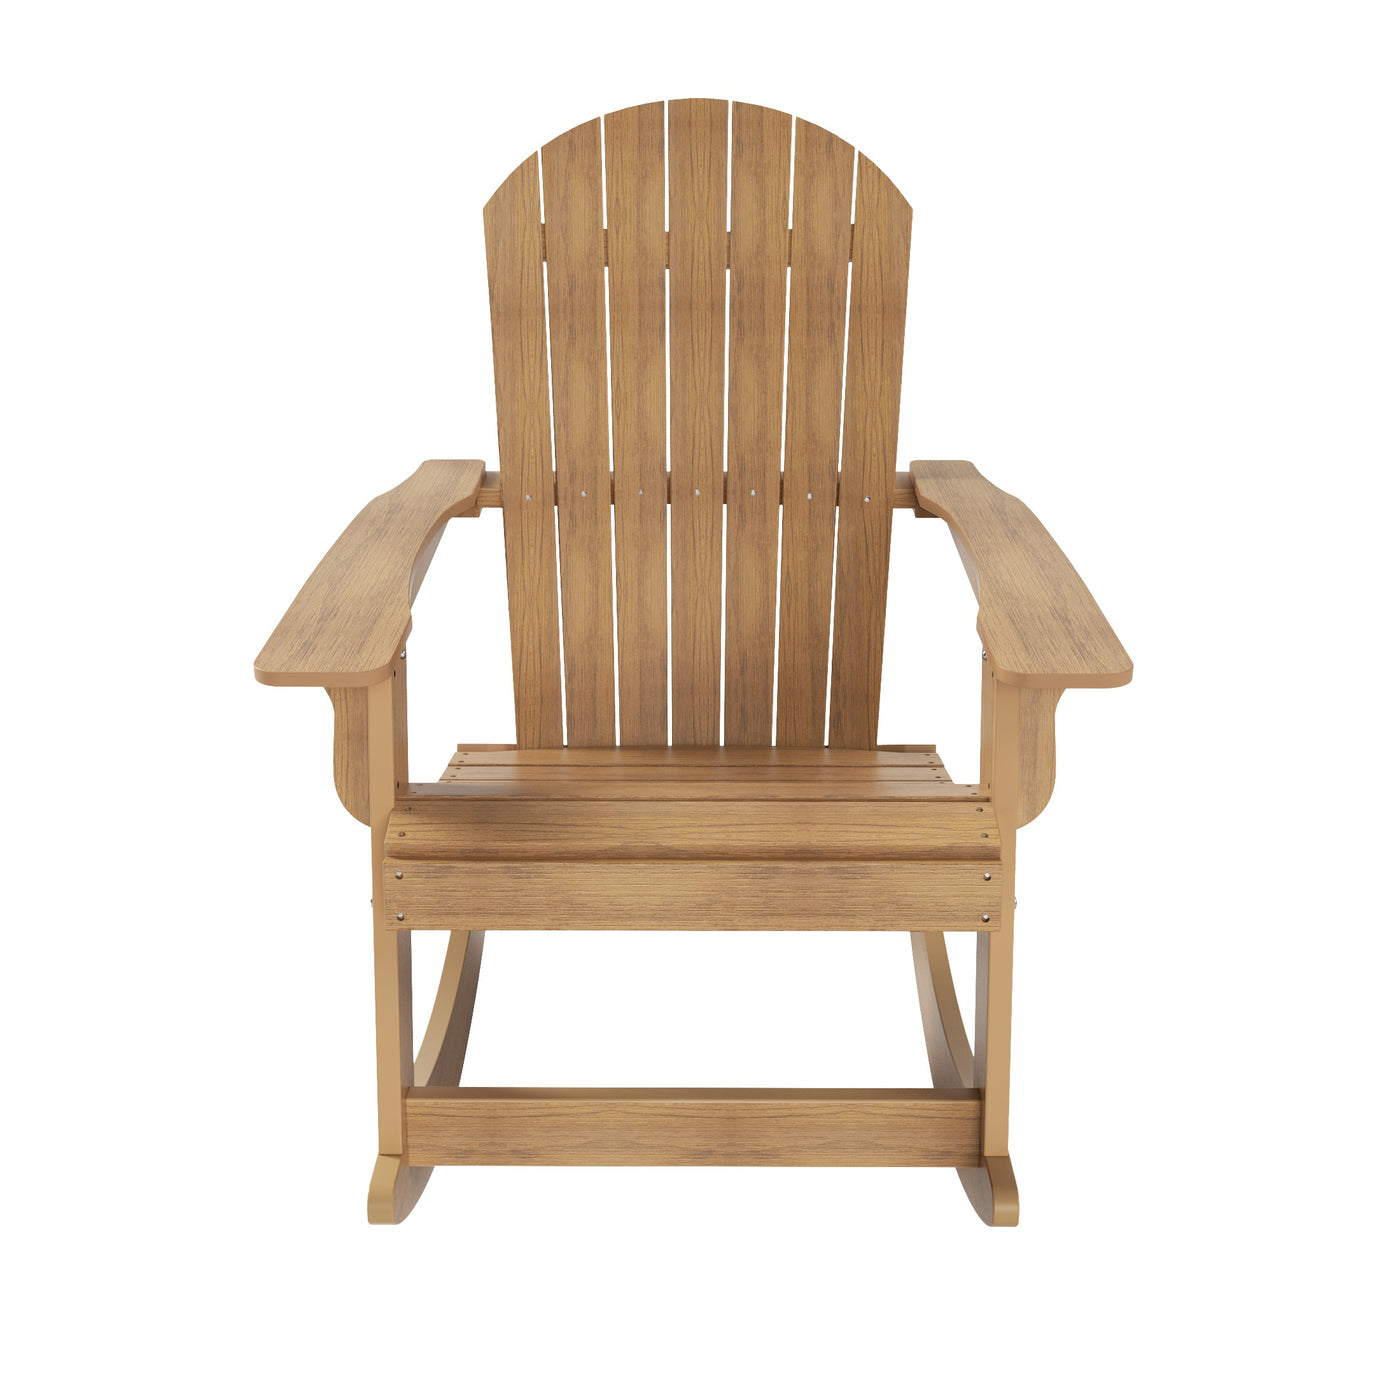 Tuscany HIPS 2-Piece Outdoor Rocking Adirondack Chair With Side Table Set